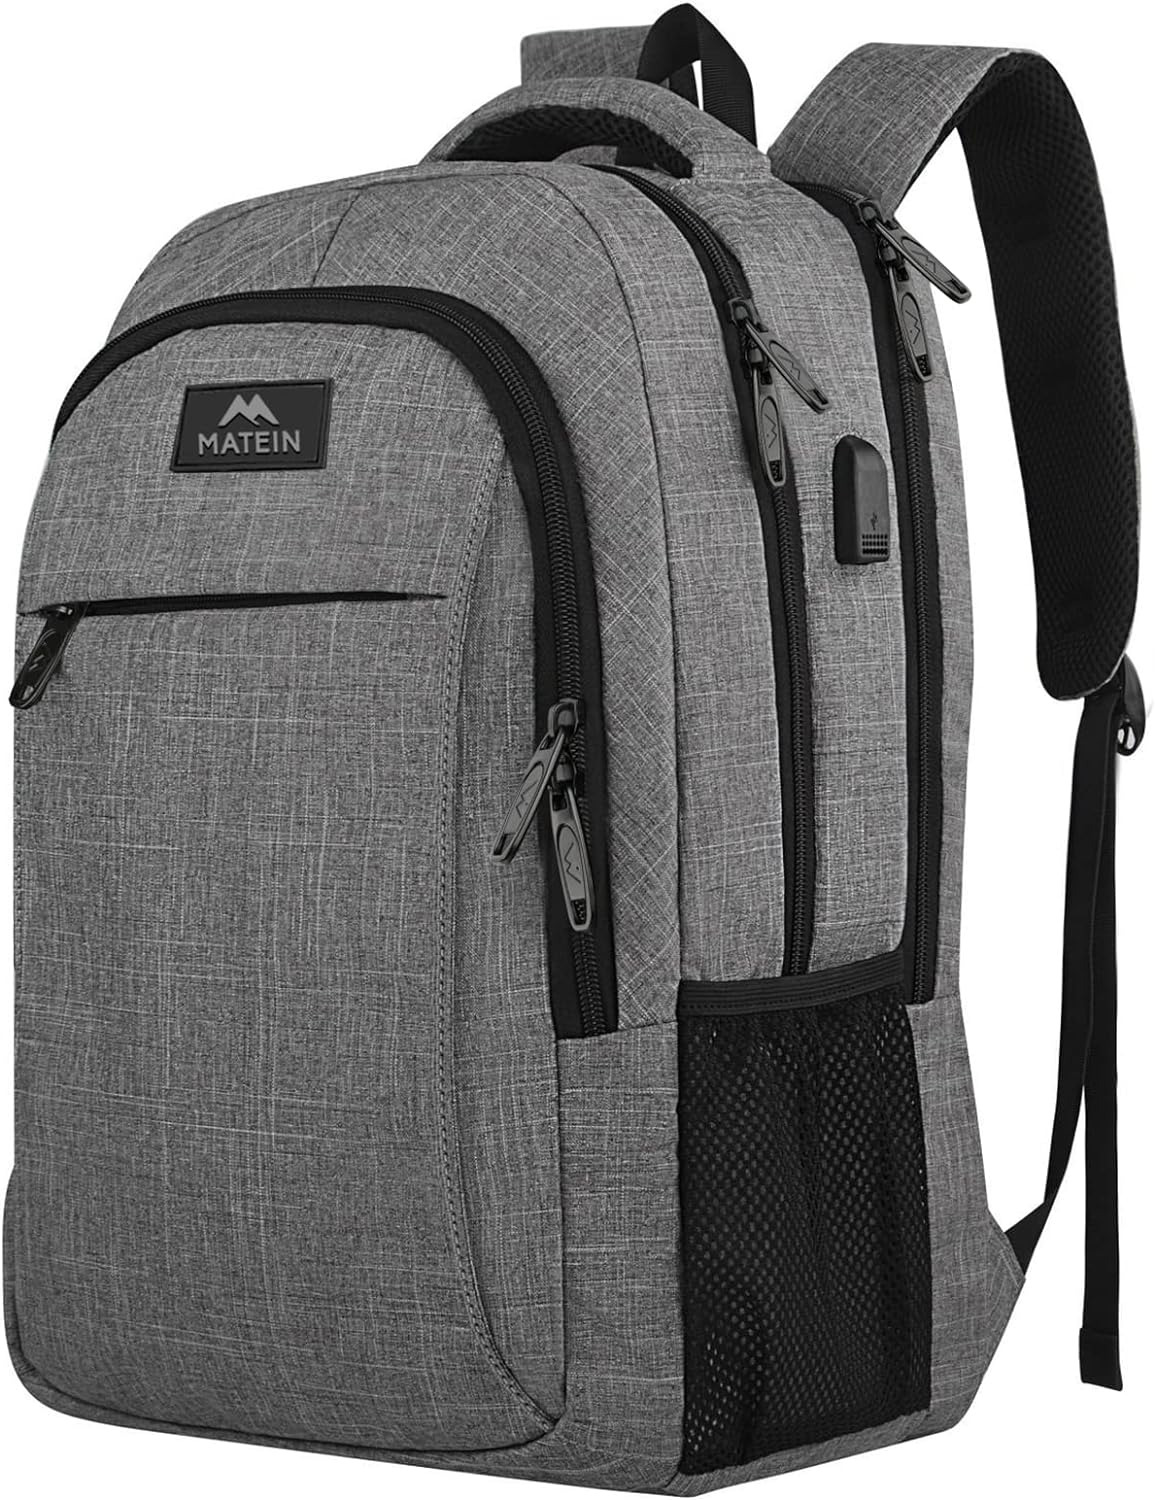 MATEIN Travel Laptop Backpack, Business Anti Theft Slim Sturdy Laptops Backpack